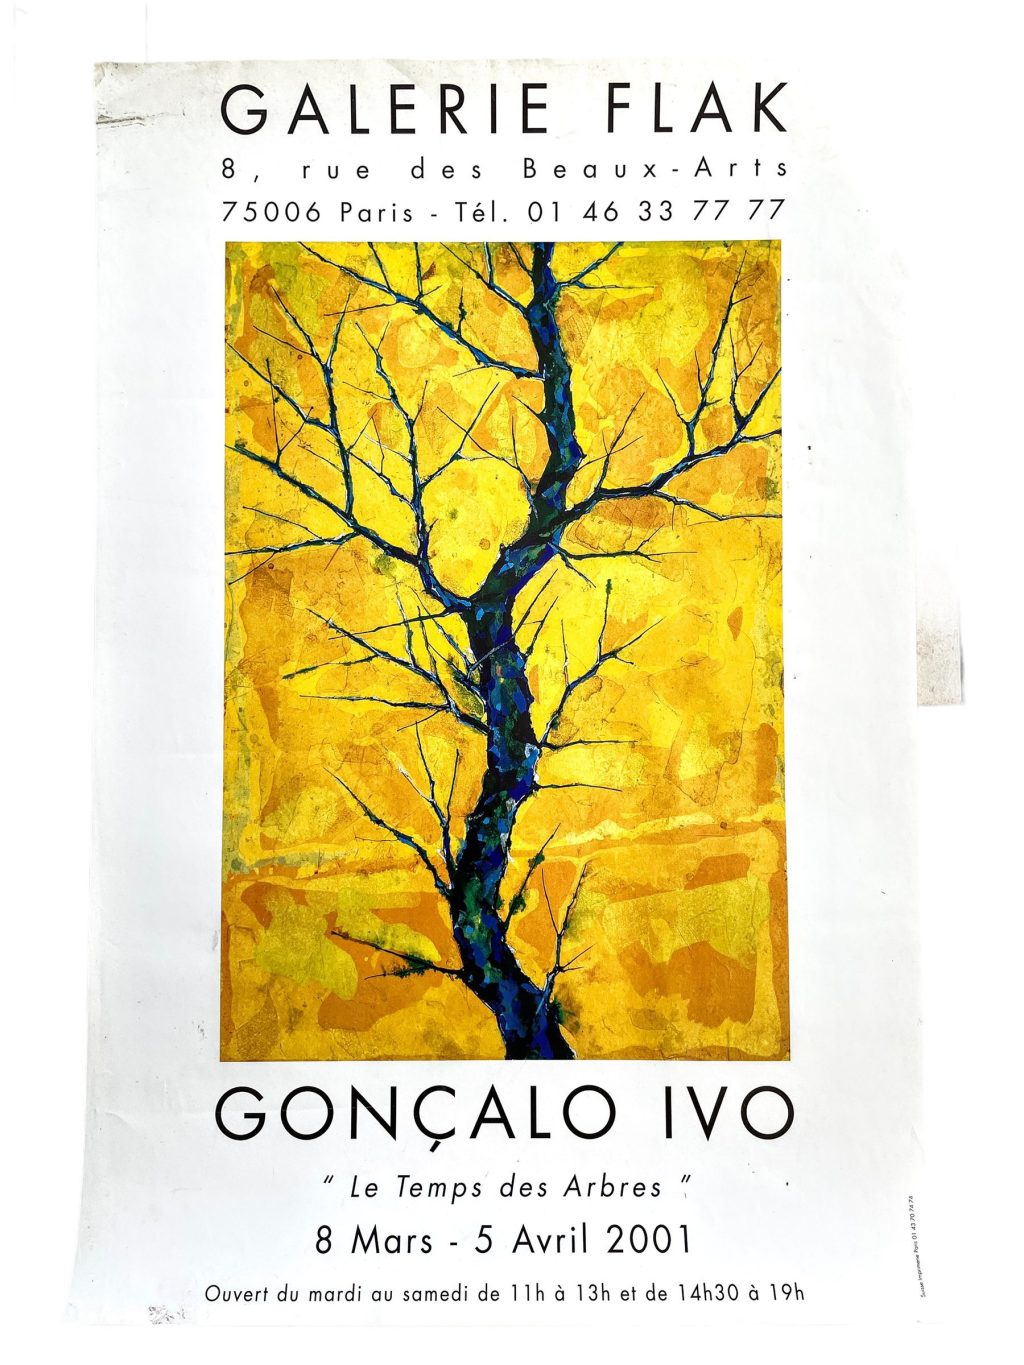 Vintage French Goncalo Ivo Galerie Flak Paris Gallery Original Exhibition Poster Wall Decor Painting c2001 / EVE